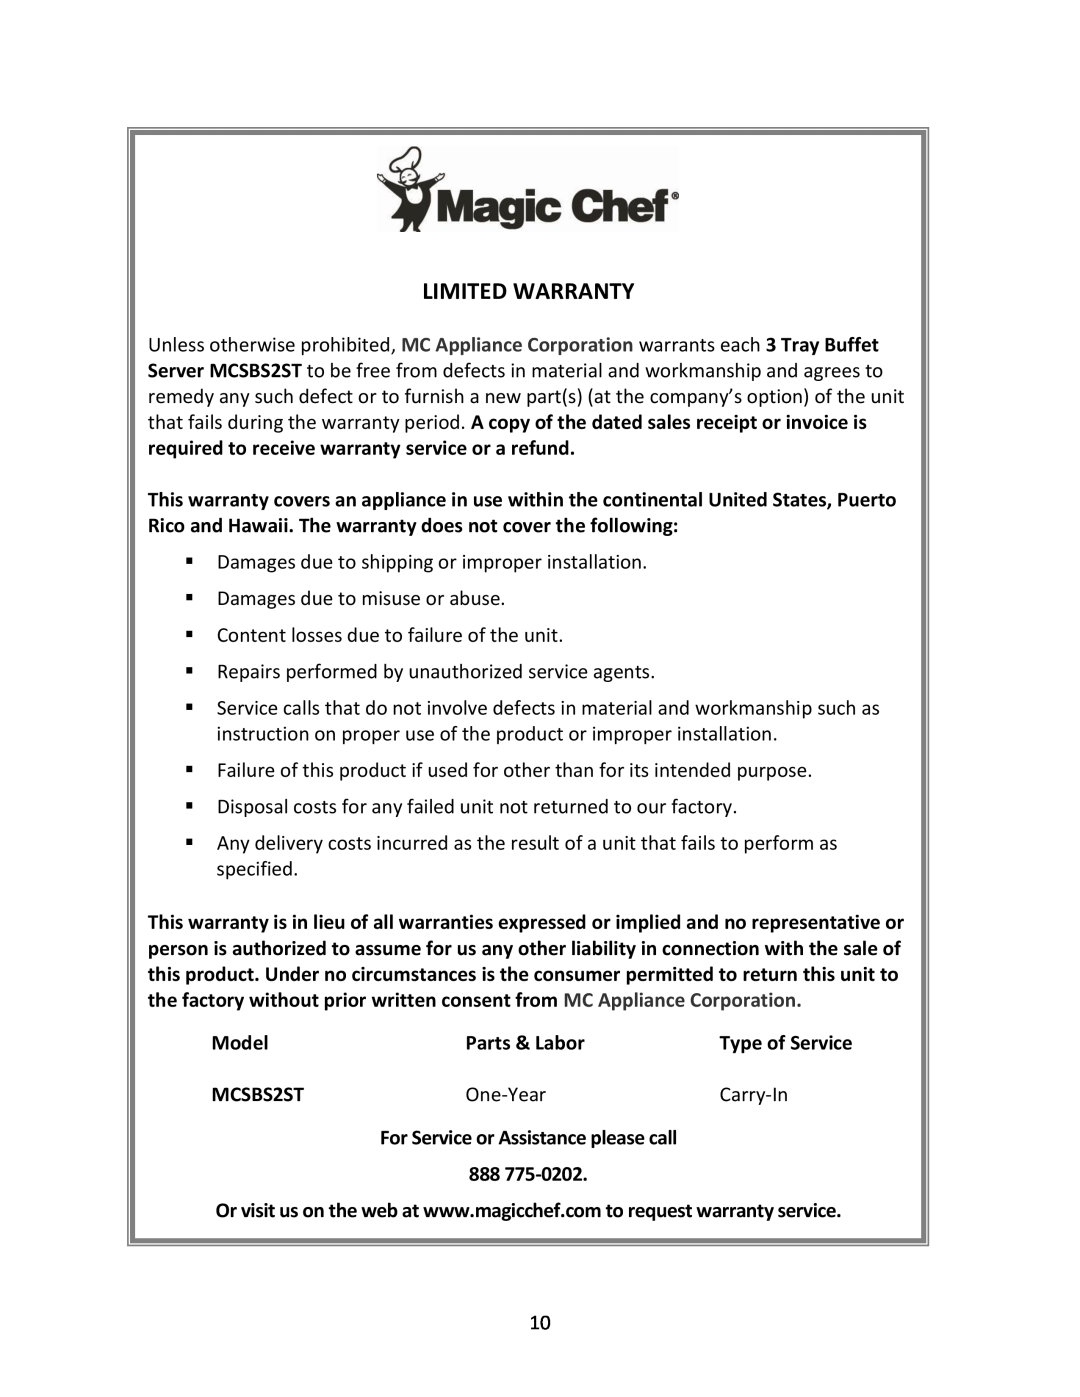 Magic Chef MCSBS2ST instruction manual Model, Parts & Labor, For Service or Assistance please call, Limited Warranty 